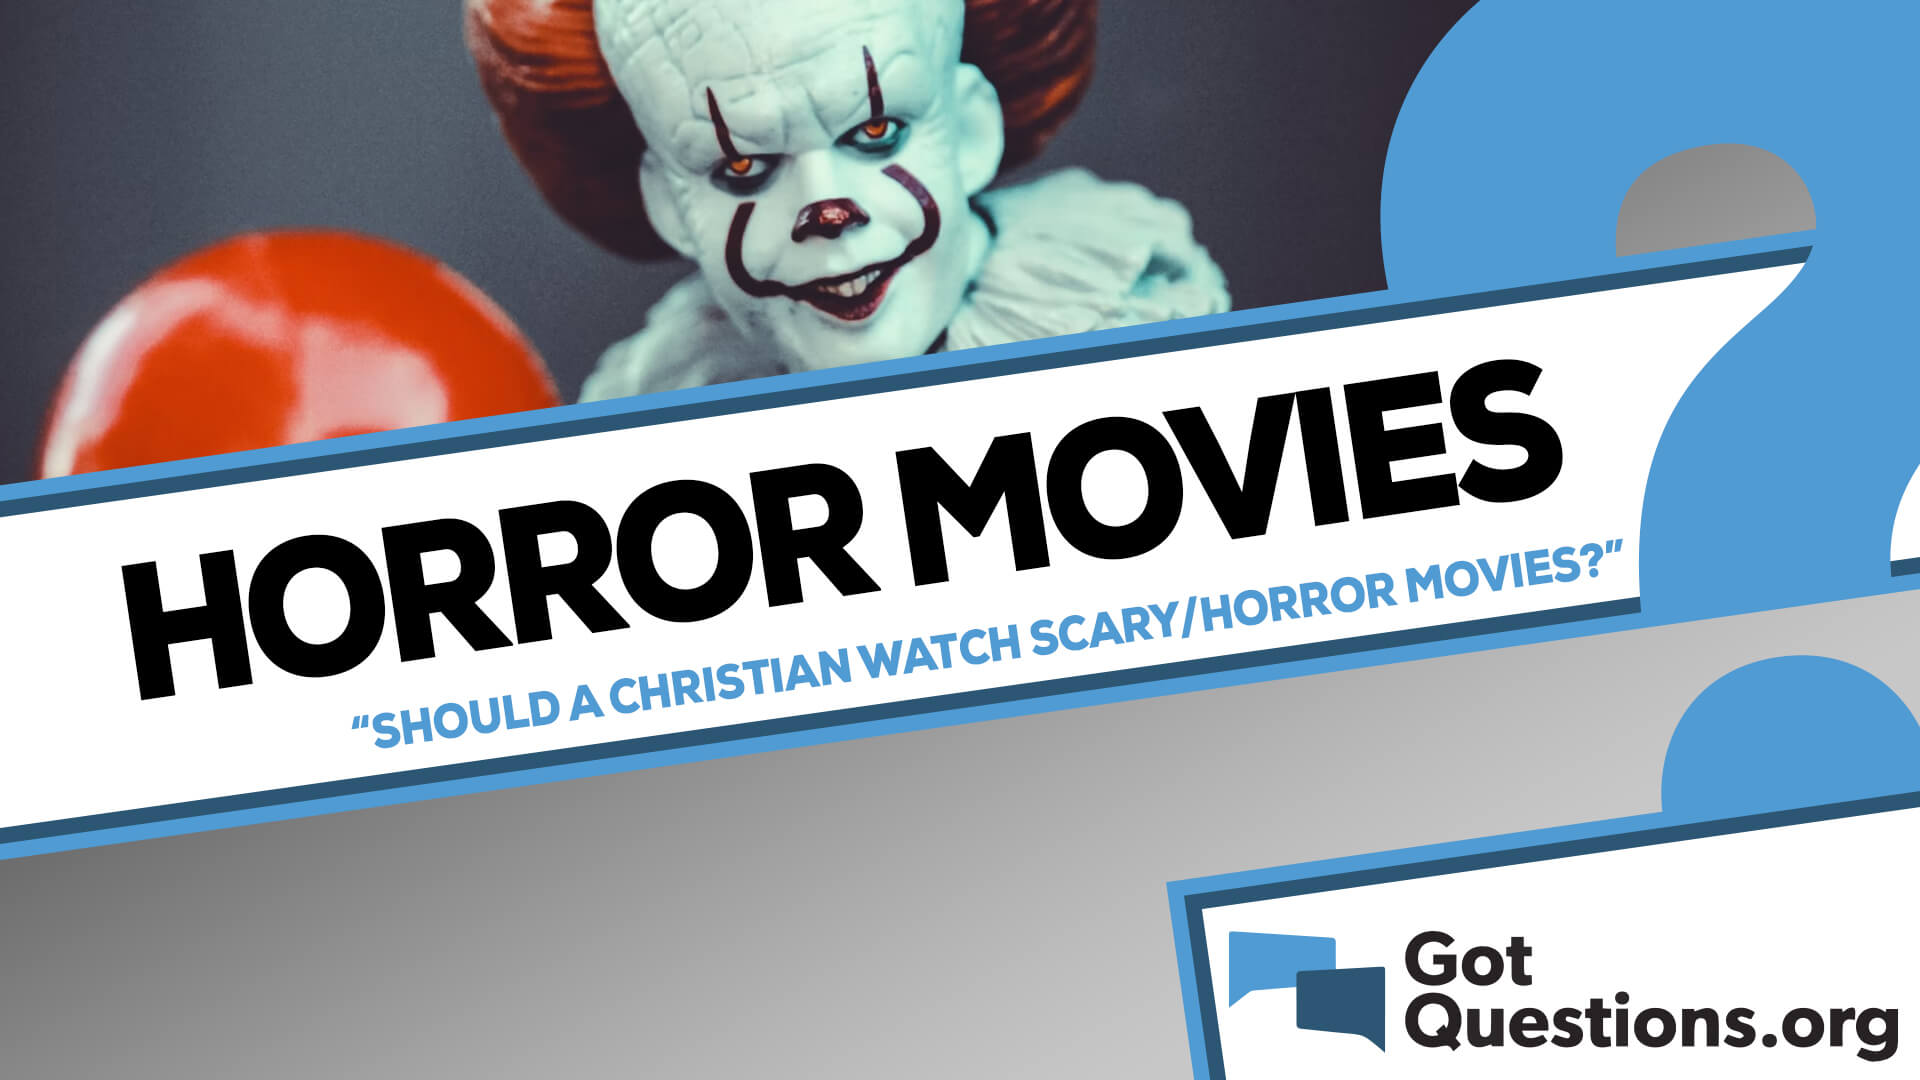 Should a Christian watch scary movies/horror movies? 